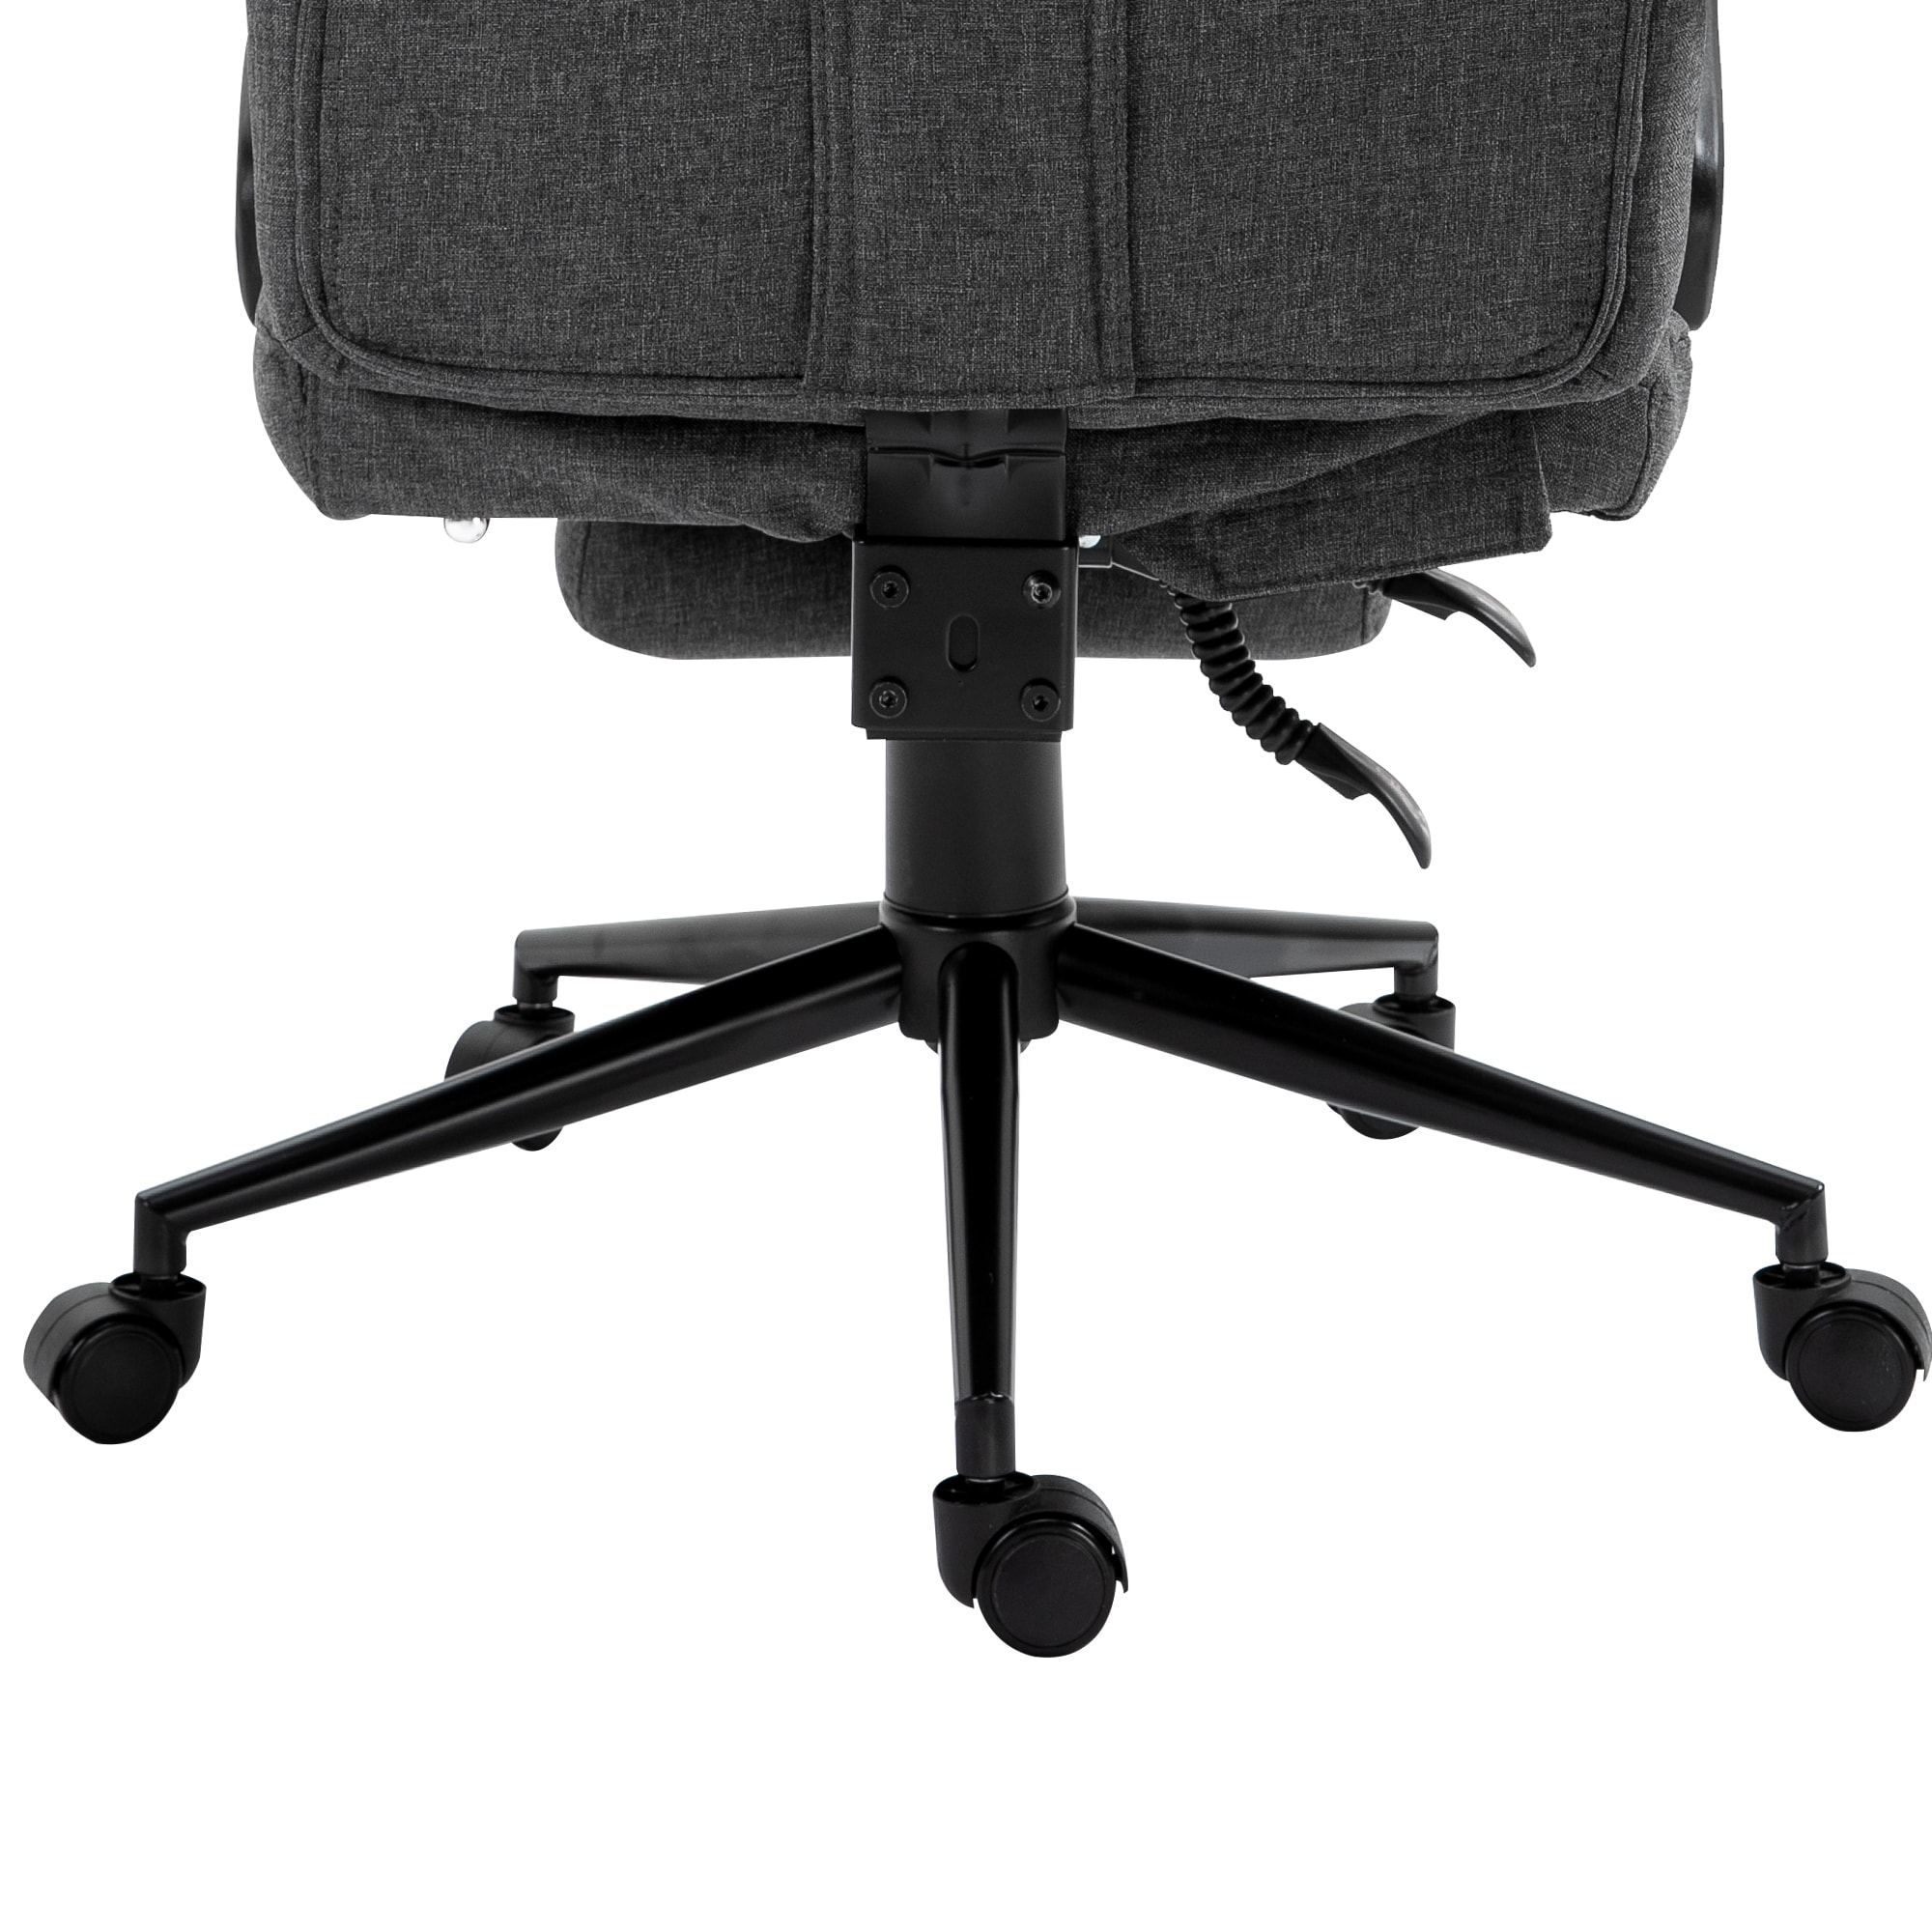 https://ak1.ostkcdn.com/images/products/is/images/direct/3ab1480f3a4f1aa0591cccbd9ed37cb4b5812589/Vinsetto-Executive-Linen-Fabric-Home-Office-Chair-with-Retractable-Footrest%2C-Headrest%2C-and-Lumbar-Support.jpg